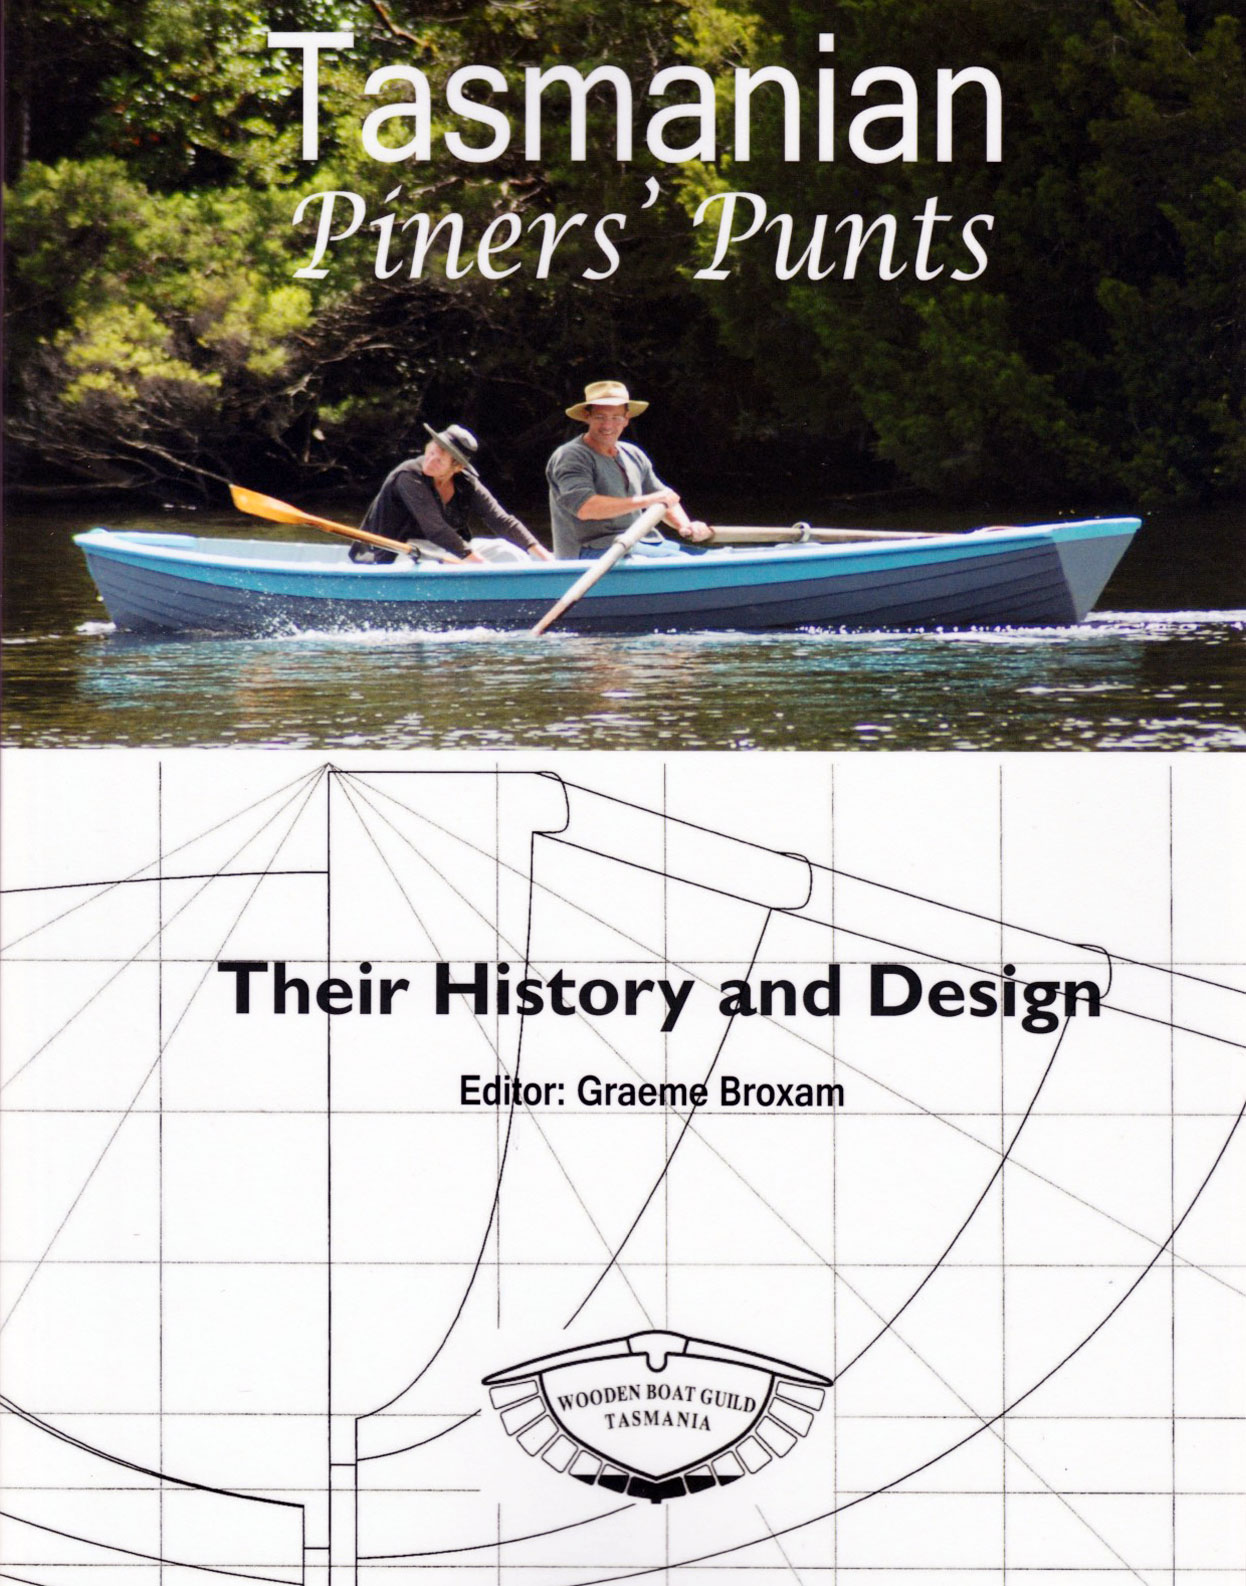 Tasmanian Piners' Punts- Their History and Design